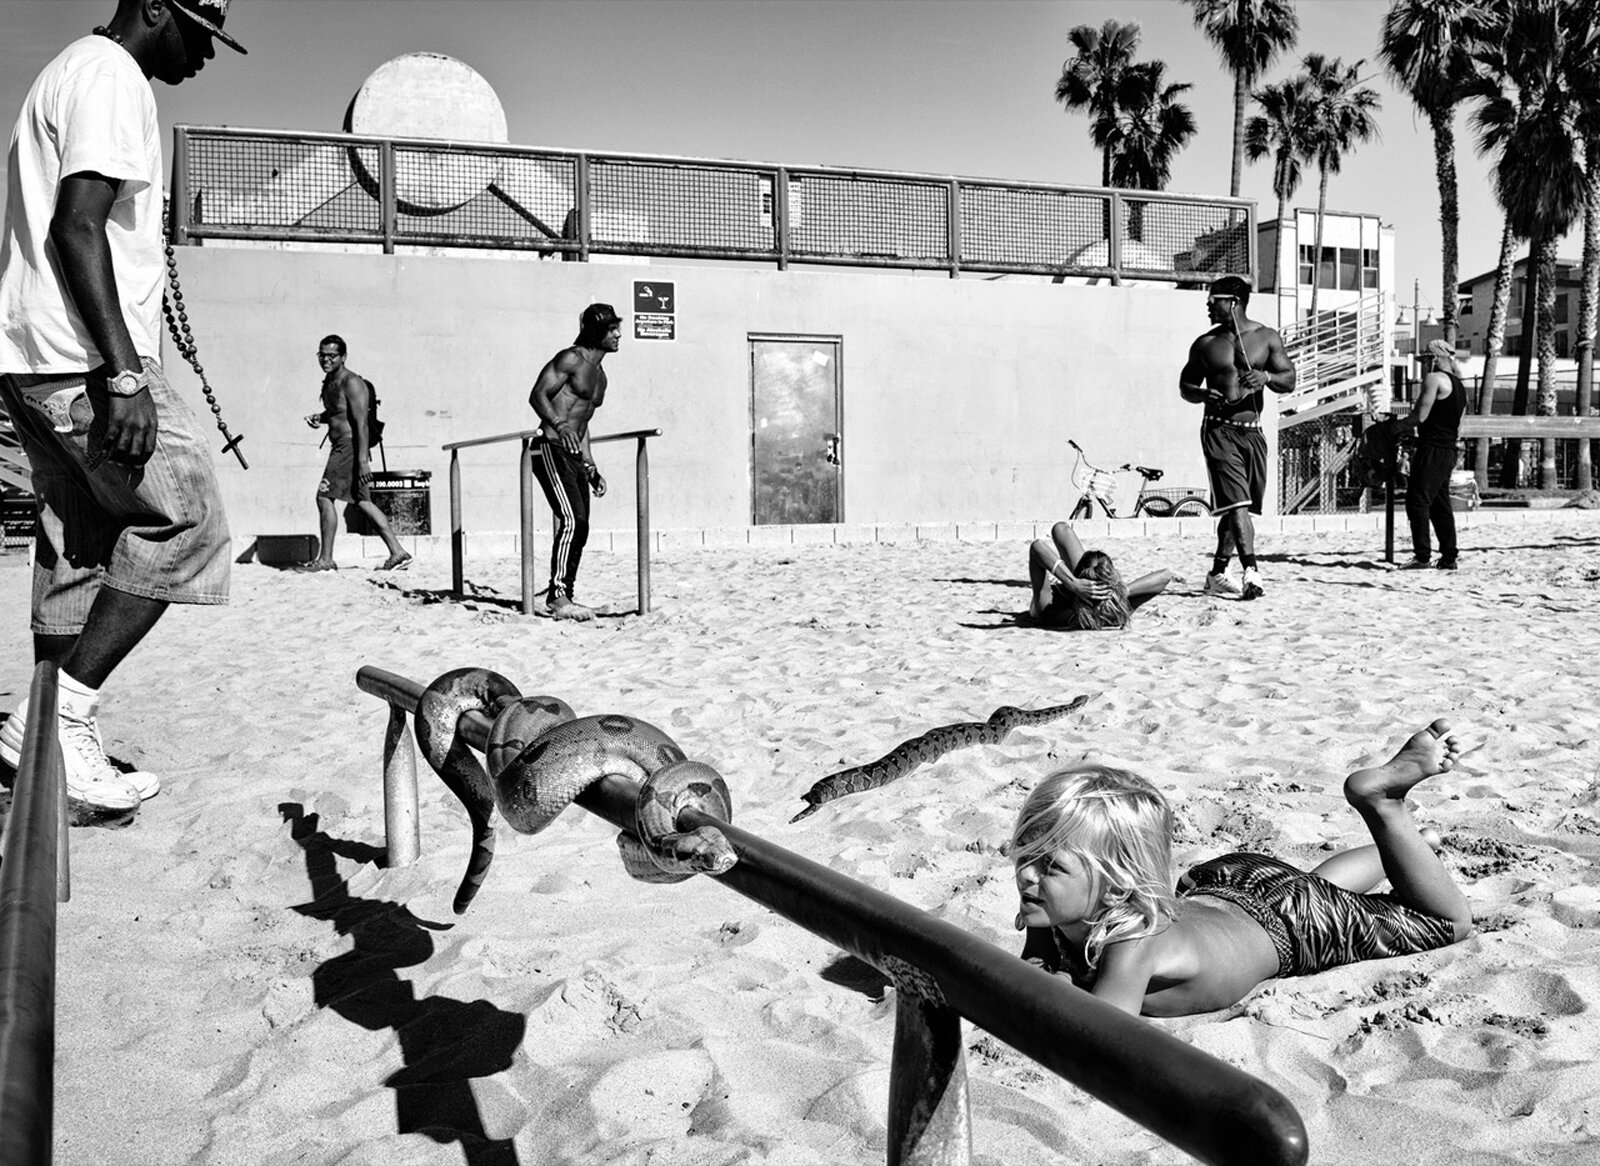 Image from Dotan's project on Venice Beach